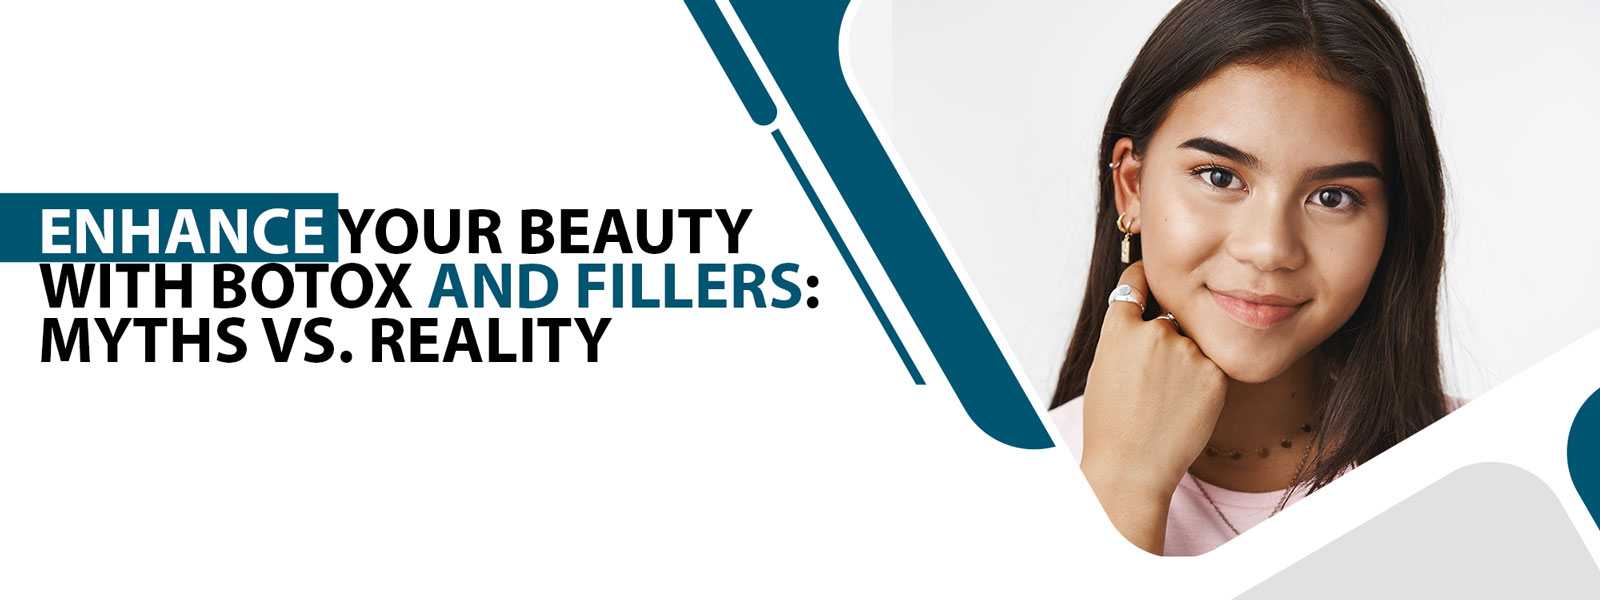 Enhance Your Beauty with Botox and Fillers: Myths vs. Reality